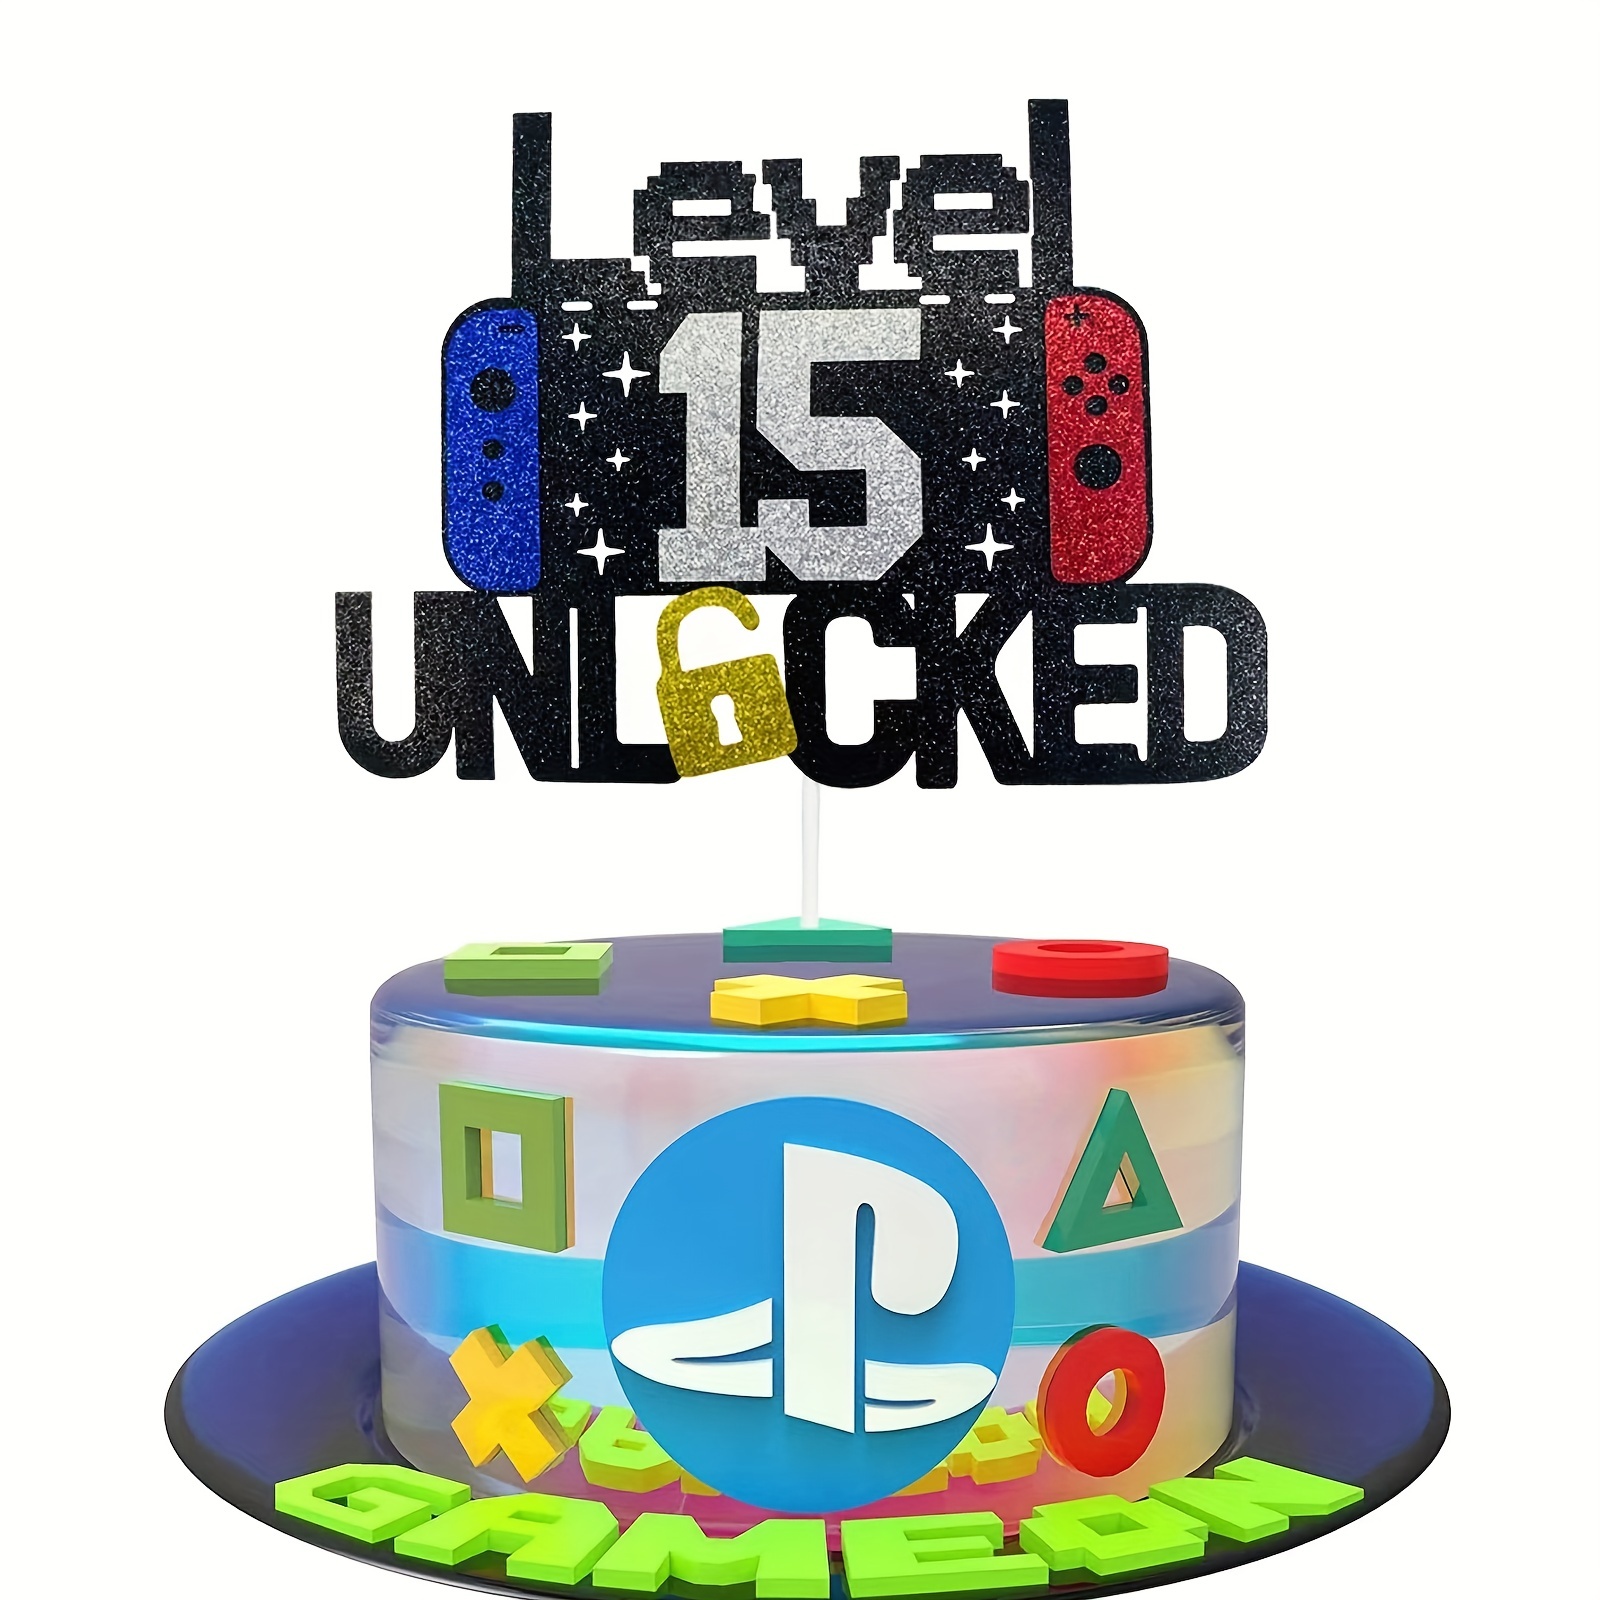 Playstation PS5 Round Cake Topper Edible - Itty Bitty Cake Toppers